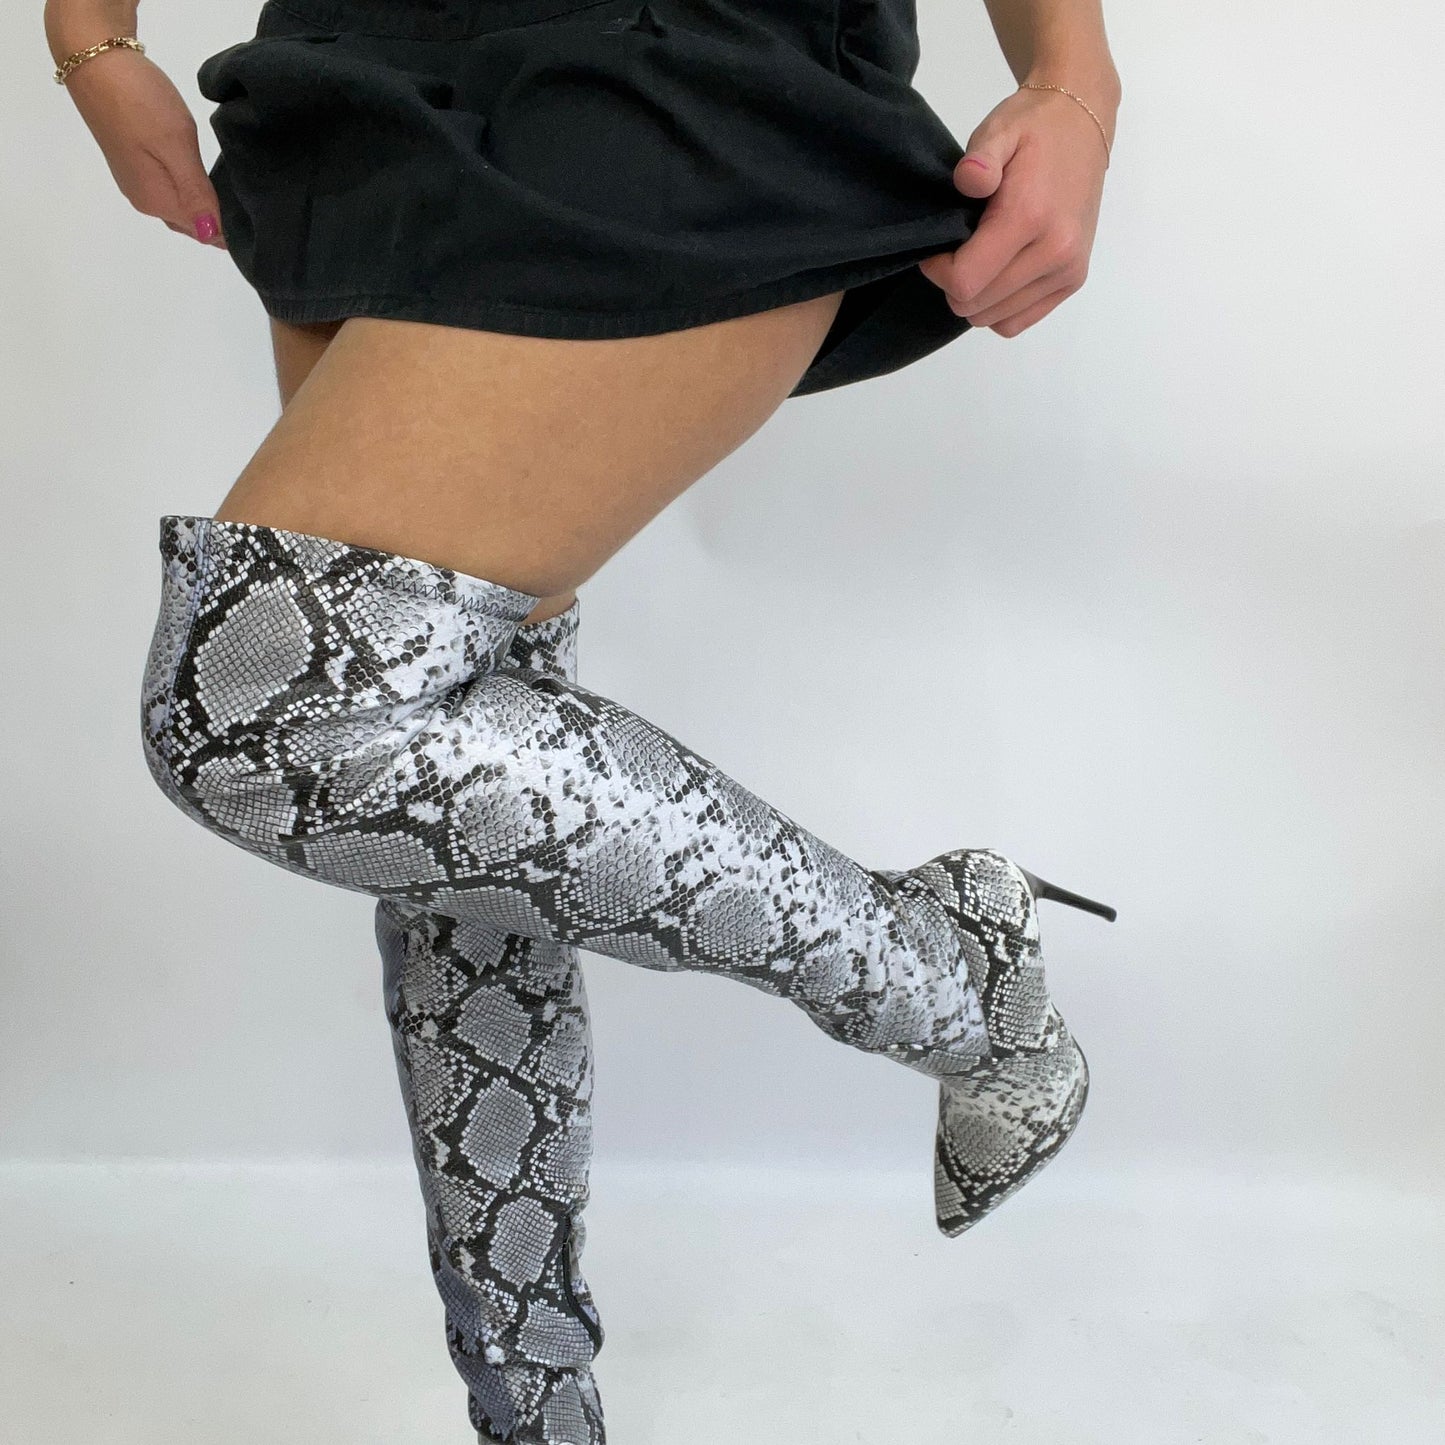 ⭐️MOB WIFE DROP | thigh high white snakeskin boots